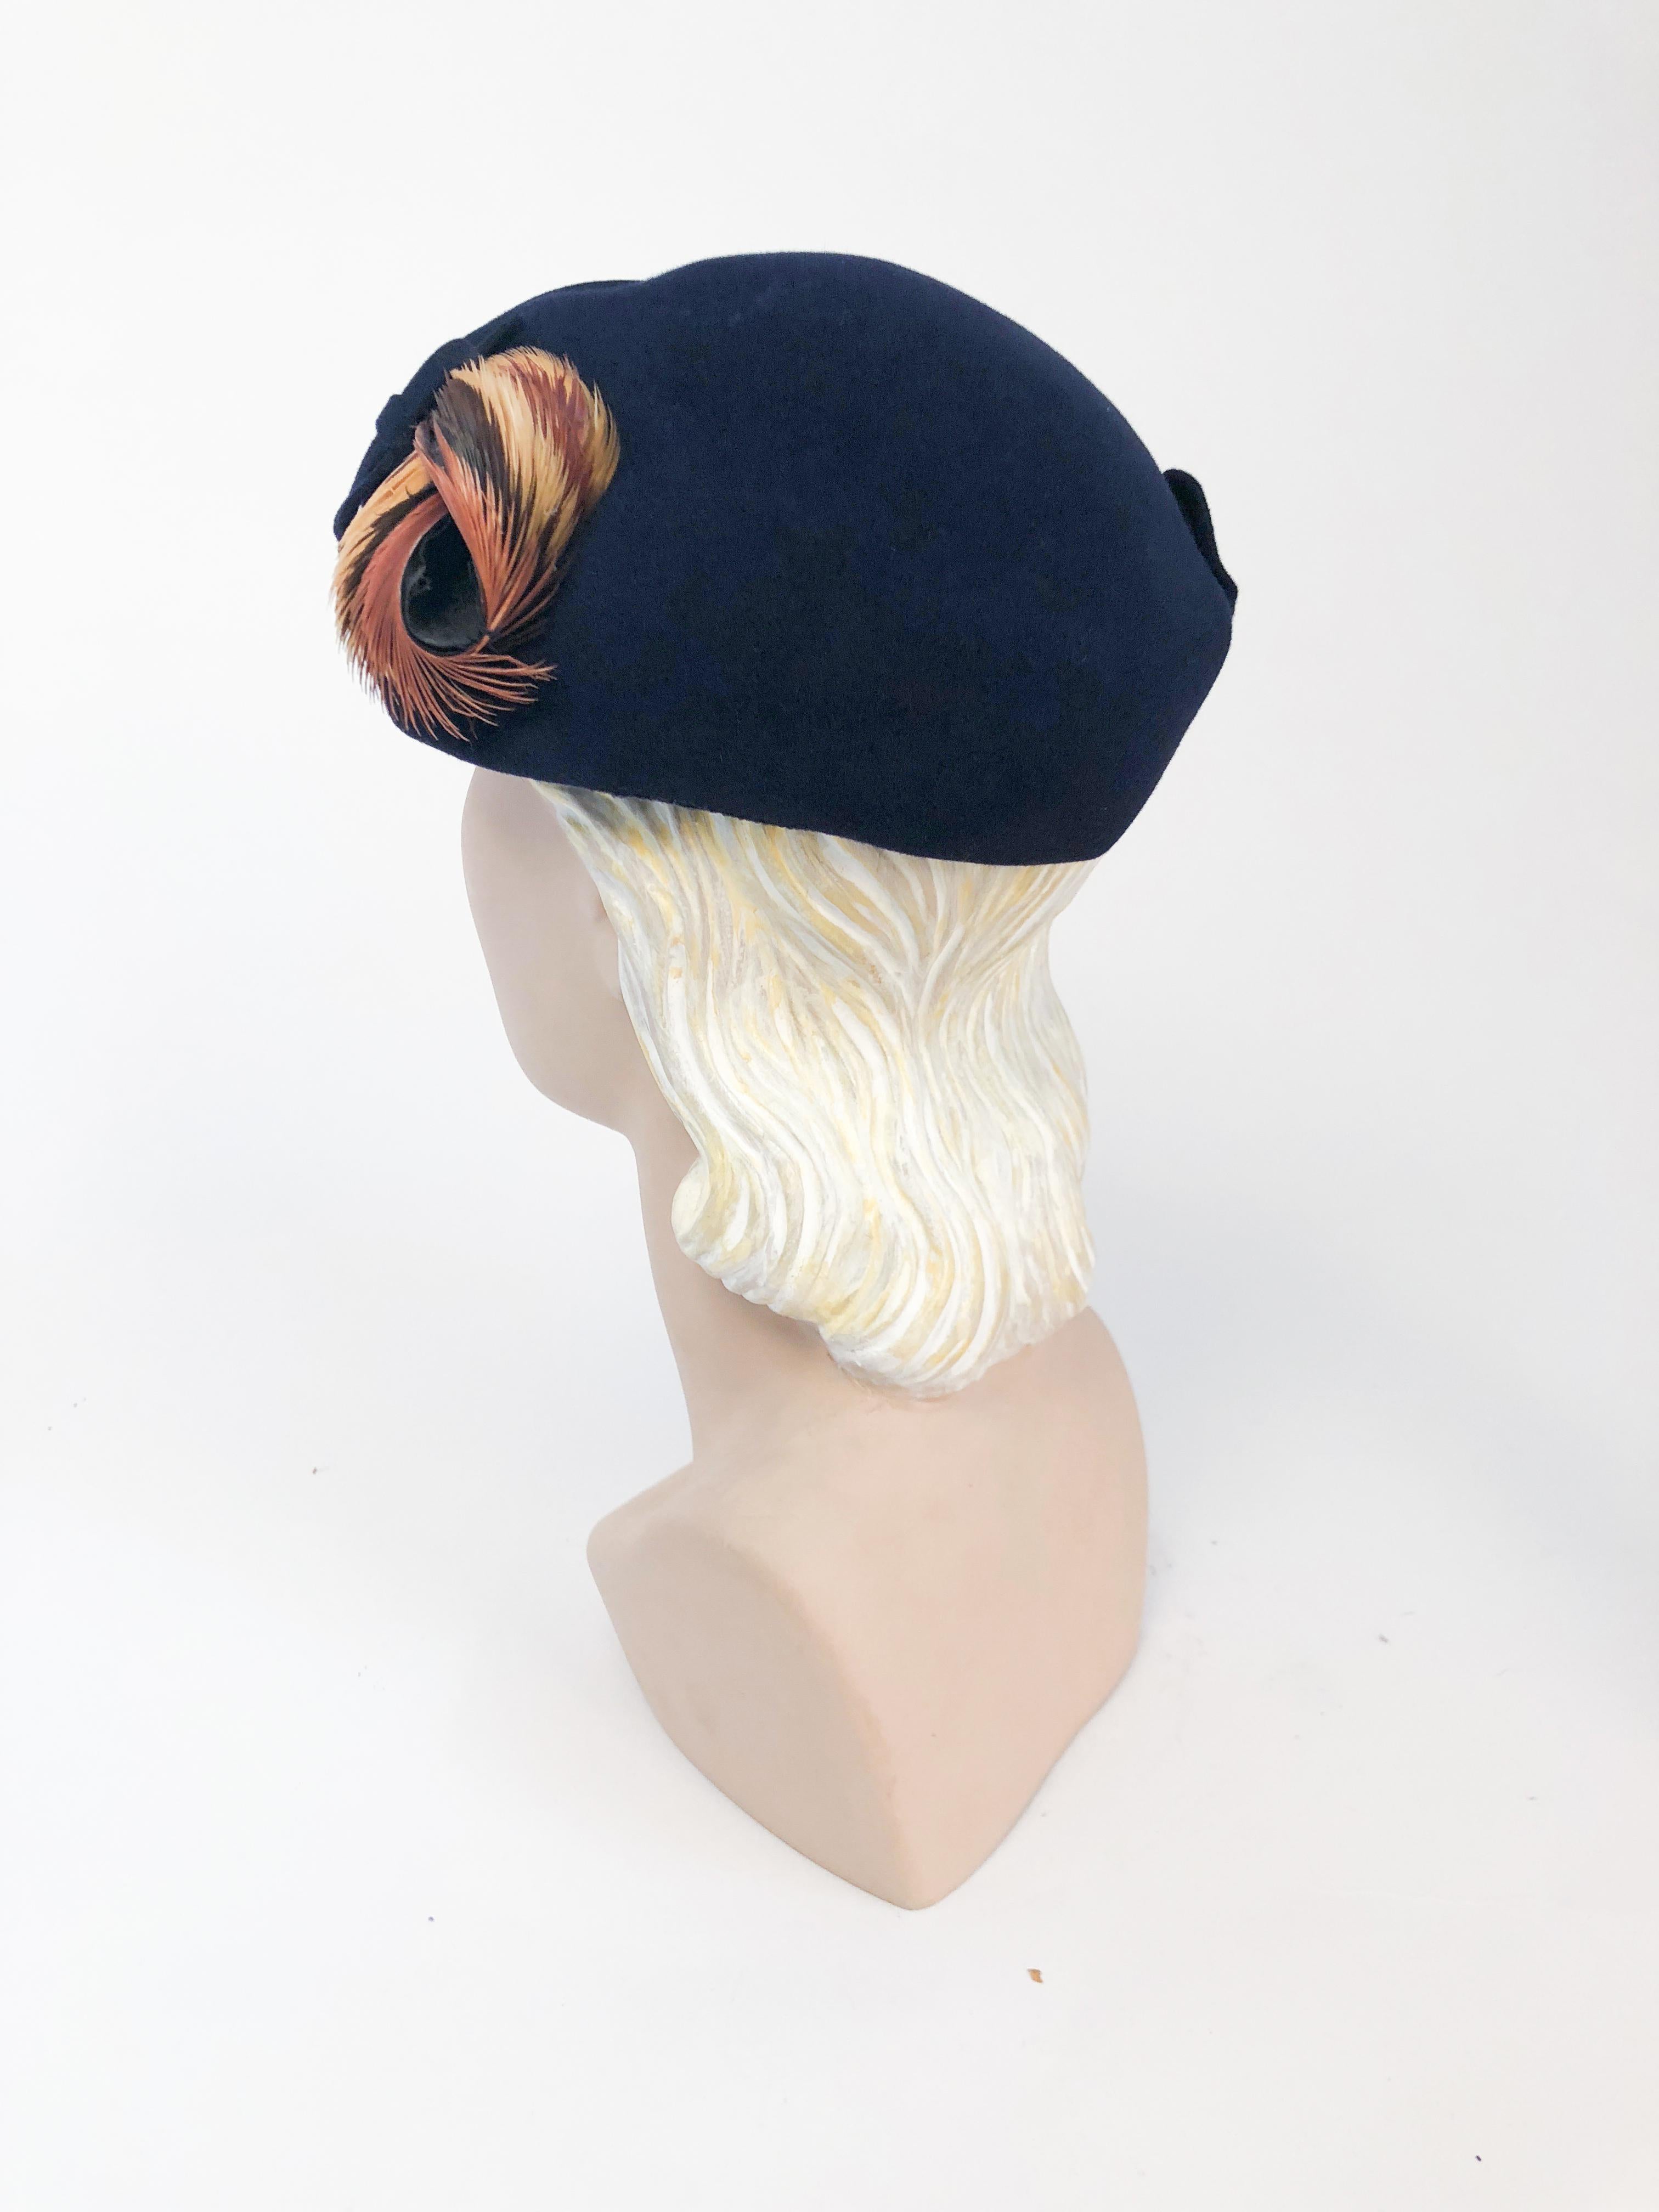 Women's 1950s Navy Felt hat with Decorative Feathers